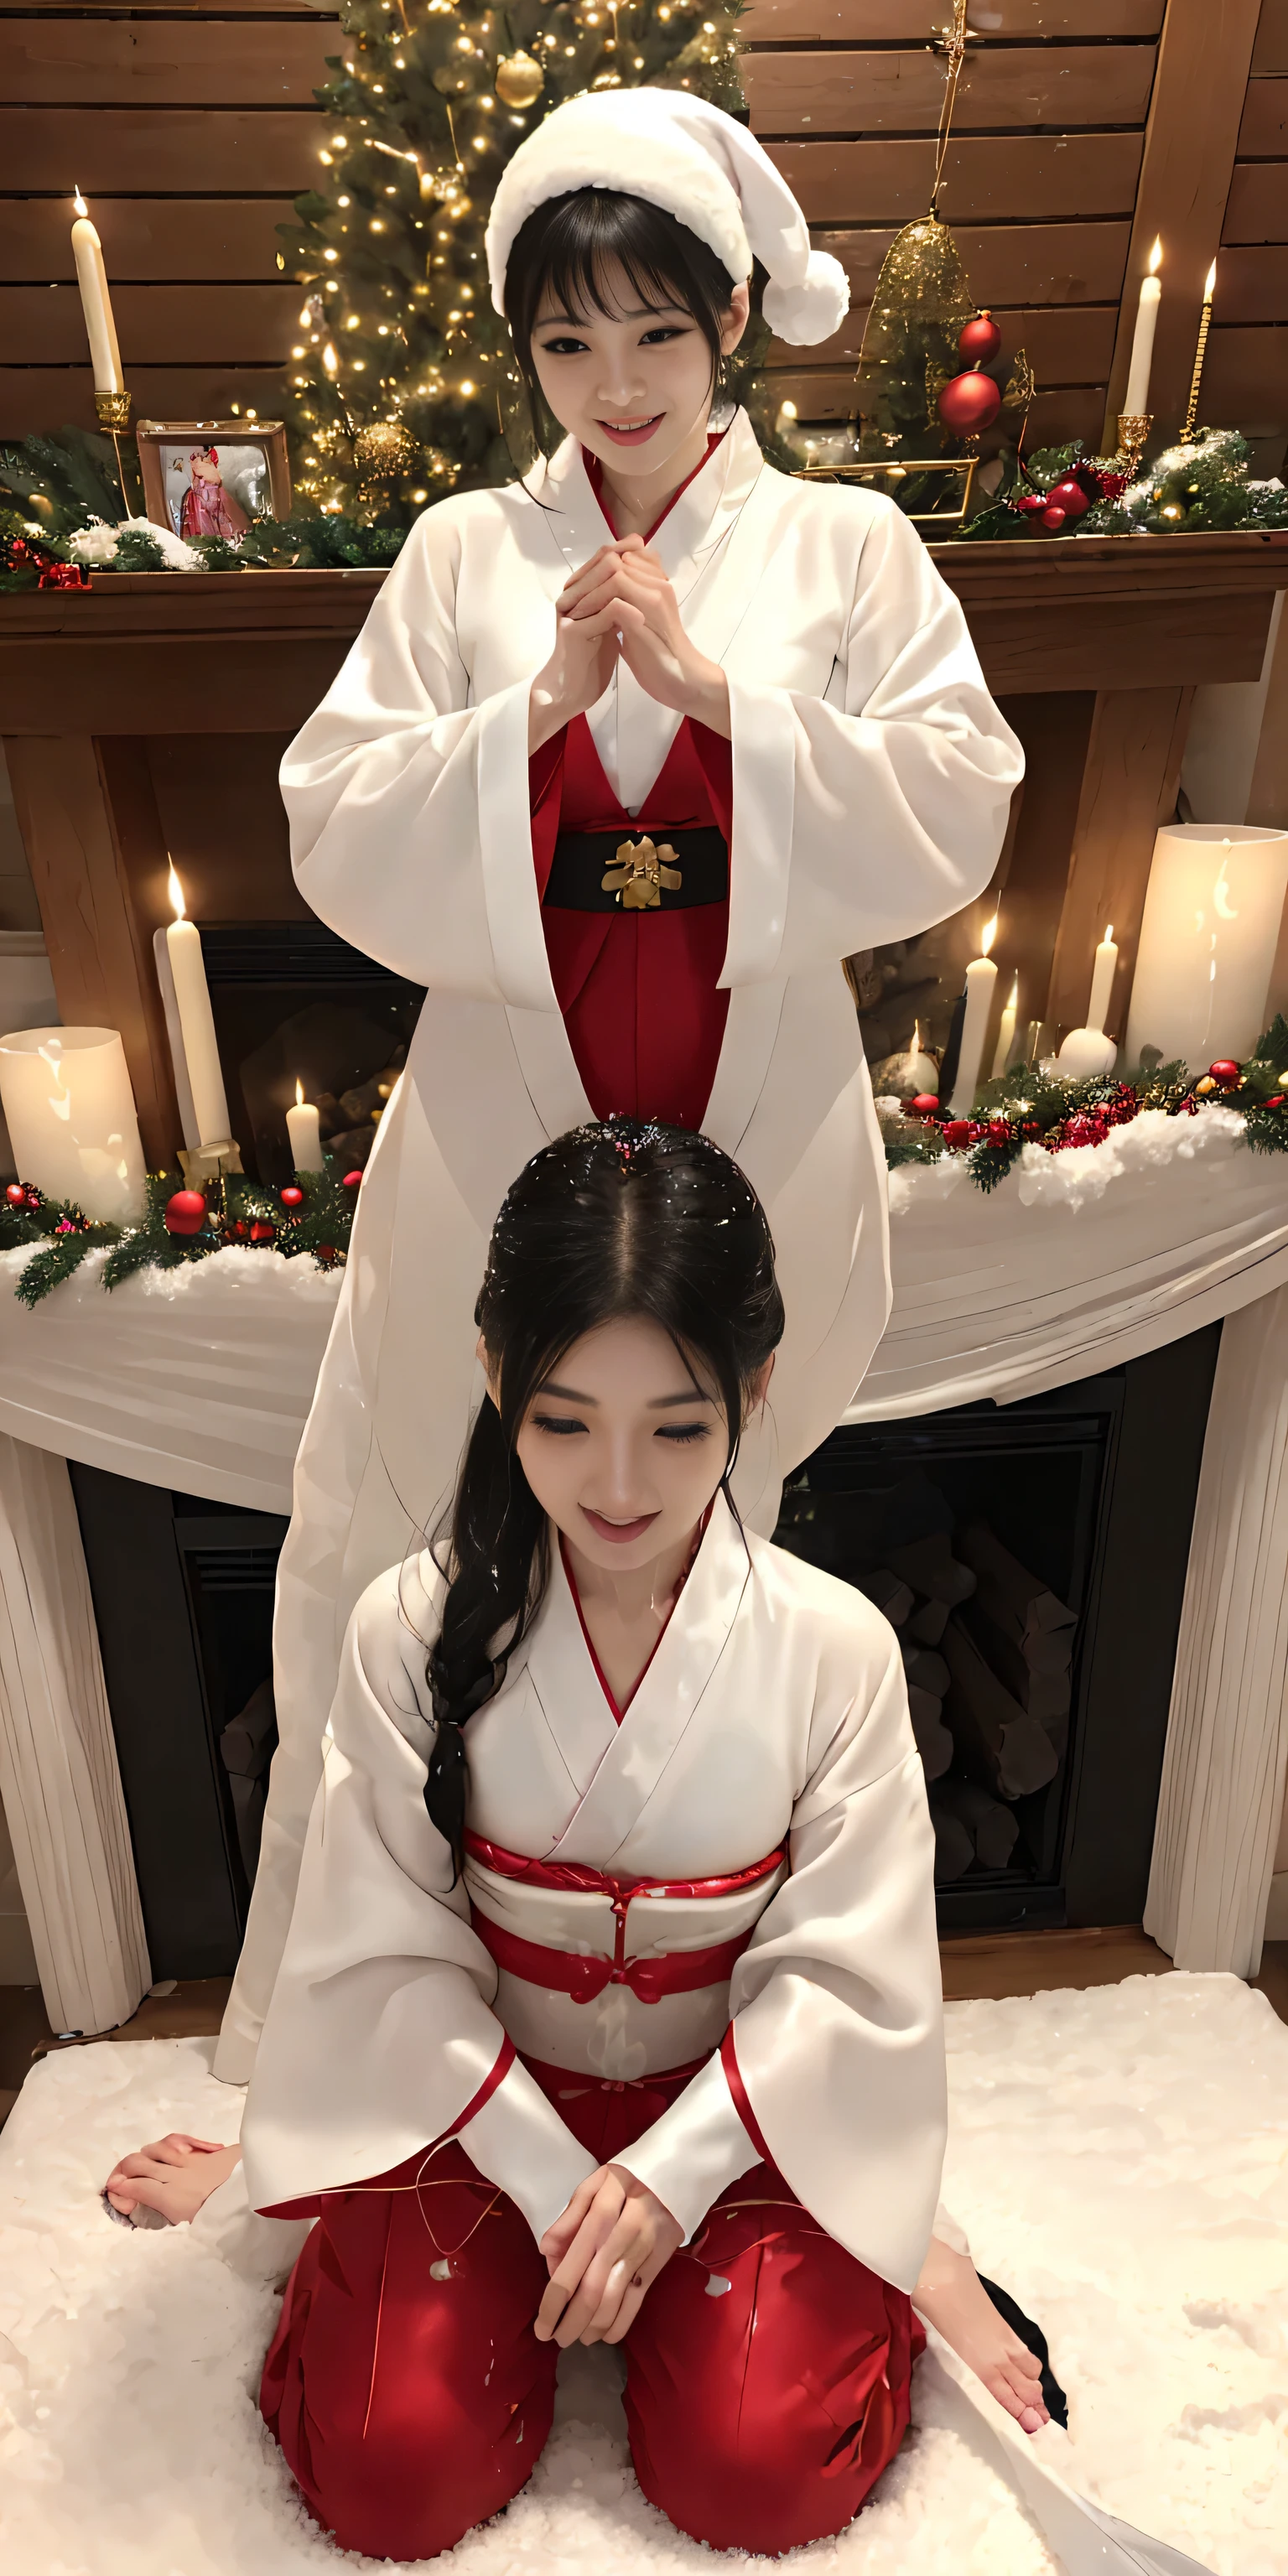 (highest quality,4K,8k,High resolution,Tabletop:1.2),Super detailed,(Realistic,Realistic,Photorealistic:1.37),(highest quality, 8k, 32k, Tabletop, Hmph:1.The pagoda of glamorous Japanese women, One Girl, ((Huge breasts :1.5)), ((semen-soaked skin:1.8))、((Wet clothes with semen:2.2)))、semen、(Abdominal muscles, Slim figure, Perfect body :1.2), Medium short hair bun: 1.1, (Erotic dresses: 1.1), (indoor, night :1.2), Super detailed face, Detailed lips, Fine grain, Double eyelids are sexy,Beautiful fine grain,Beautiful lip detail, Sexy seductive pose, Spread your legs wide, Seductive Face, Highly detailed eyes and face,Long eyelashes,One Girl,Portraiture,An illustration,Now,Christmas tree,Sparkling Light,Cozy red hat and gloves, Mini Dress, Ample breasts, Winter Wonderland,surprise,happiness,indices,excited,Expression of joy,Magical atmosphere,Shukugi,Decorated,Fluffy Snow,On the roof,Starry Sky,Peppermint Candy Cane,Magical Reindeer,Magical Forest,Cold breath,Glowing Fireplace,wrapping ,Decorations,Christmas stockings,Snow-covered ground,Skid,sparkling snowflakes,A pleasant surprise,Glittering Decorations,Cheerful laughter,Expectations,A happy reunion,Cozy socks,cocoa,Gingerbread Cookies,snowball fight,Icicle